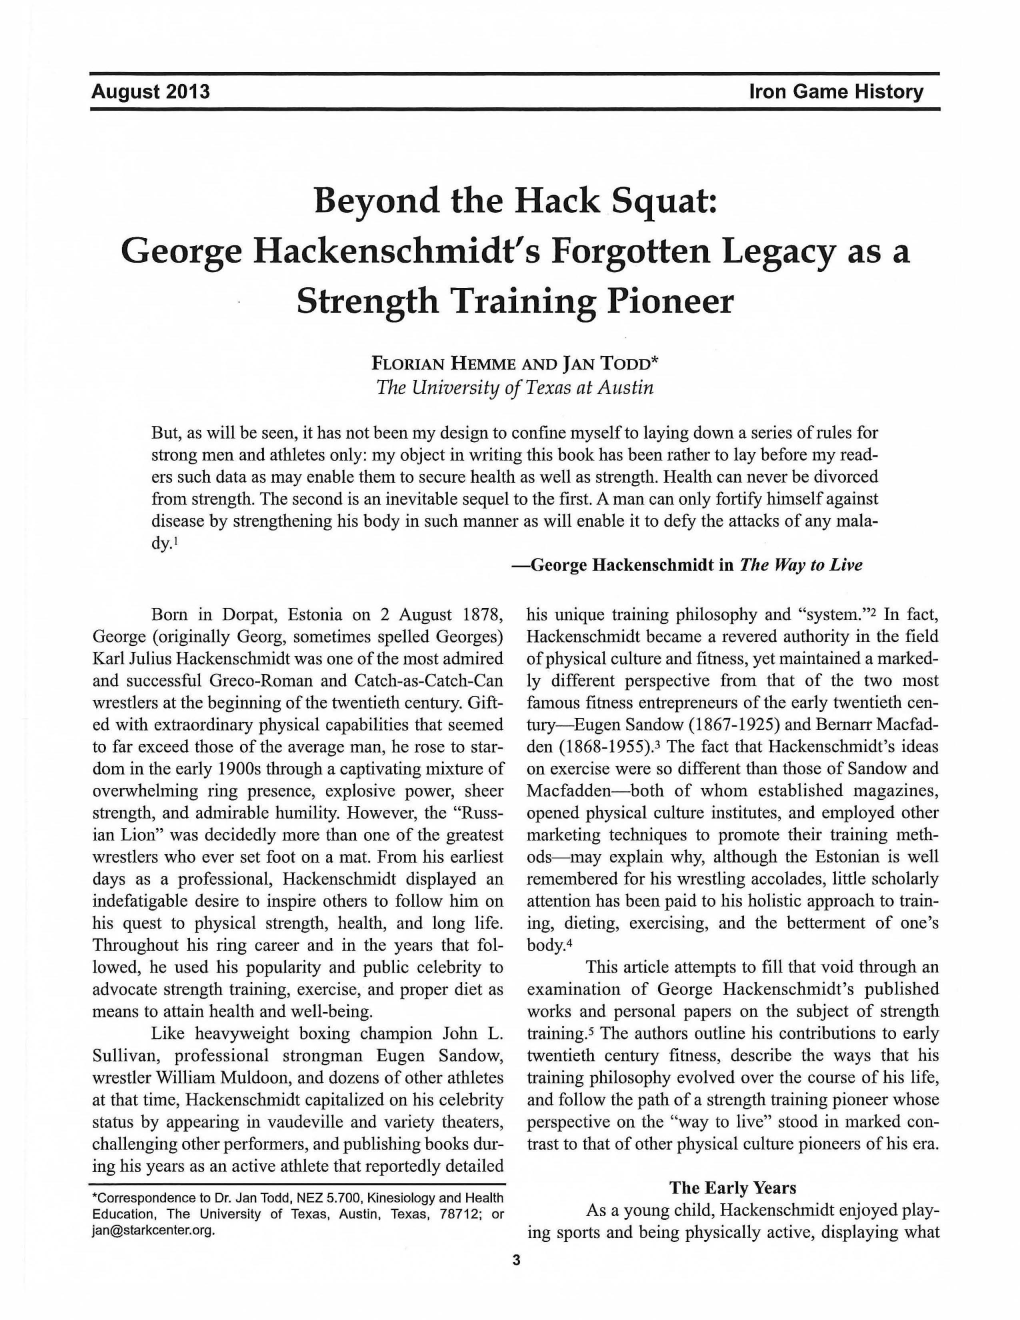 Beyond the Hack Squat: George Hackenschmidt' S Forgotten Legacy As a Strength Training Pioneer